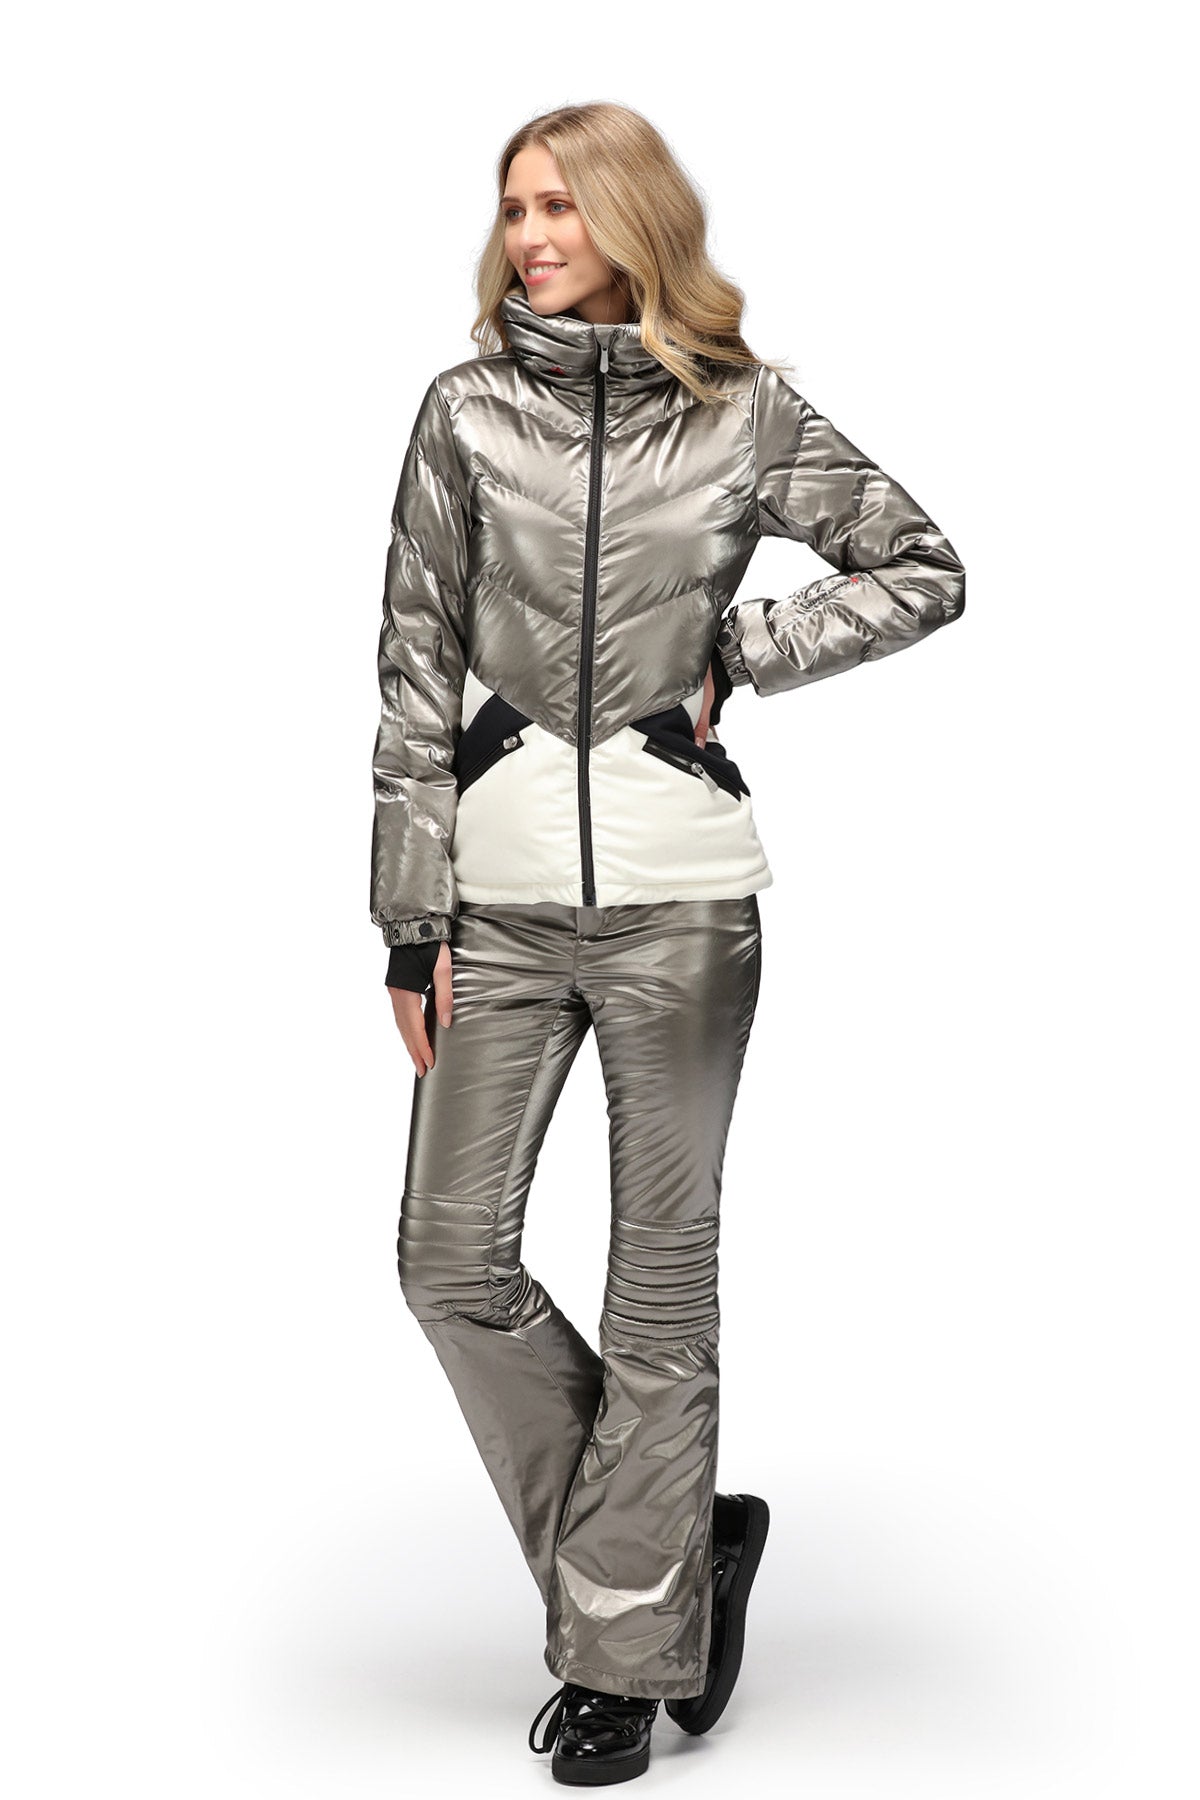 Perfect Moment Aurora Flare Race Ski Pant in Silver